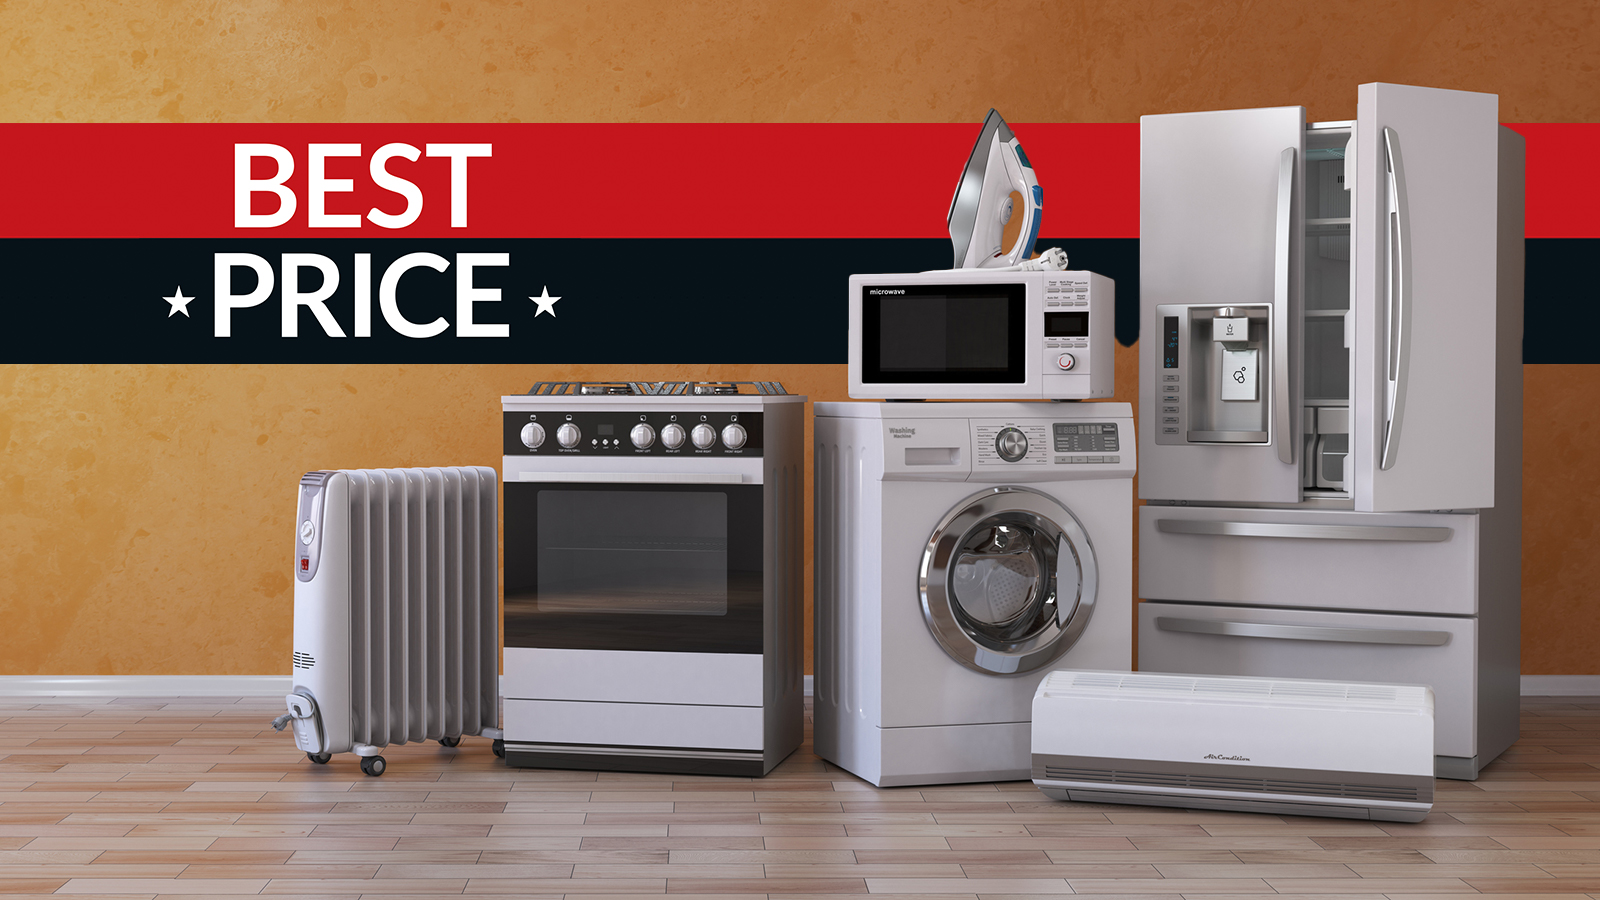 Home Shopping Spree sale event: Up to 40% off on home, kitchen  appliances and more